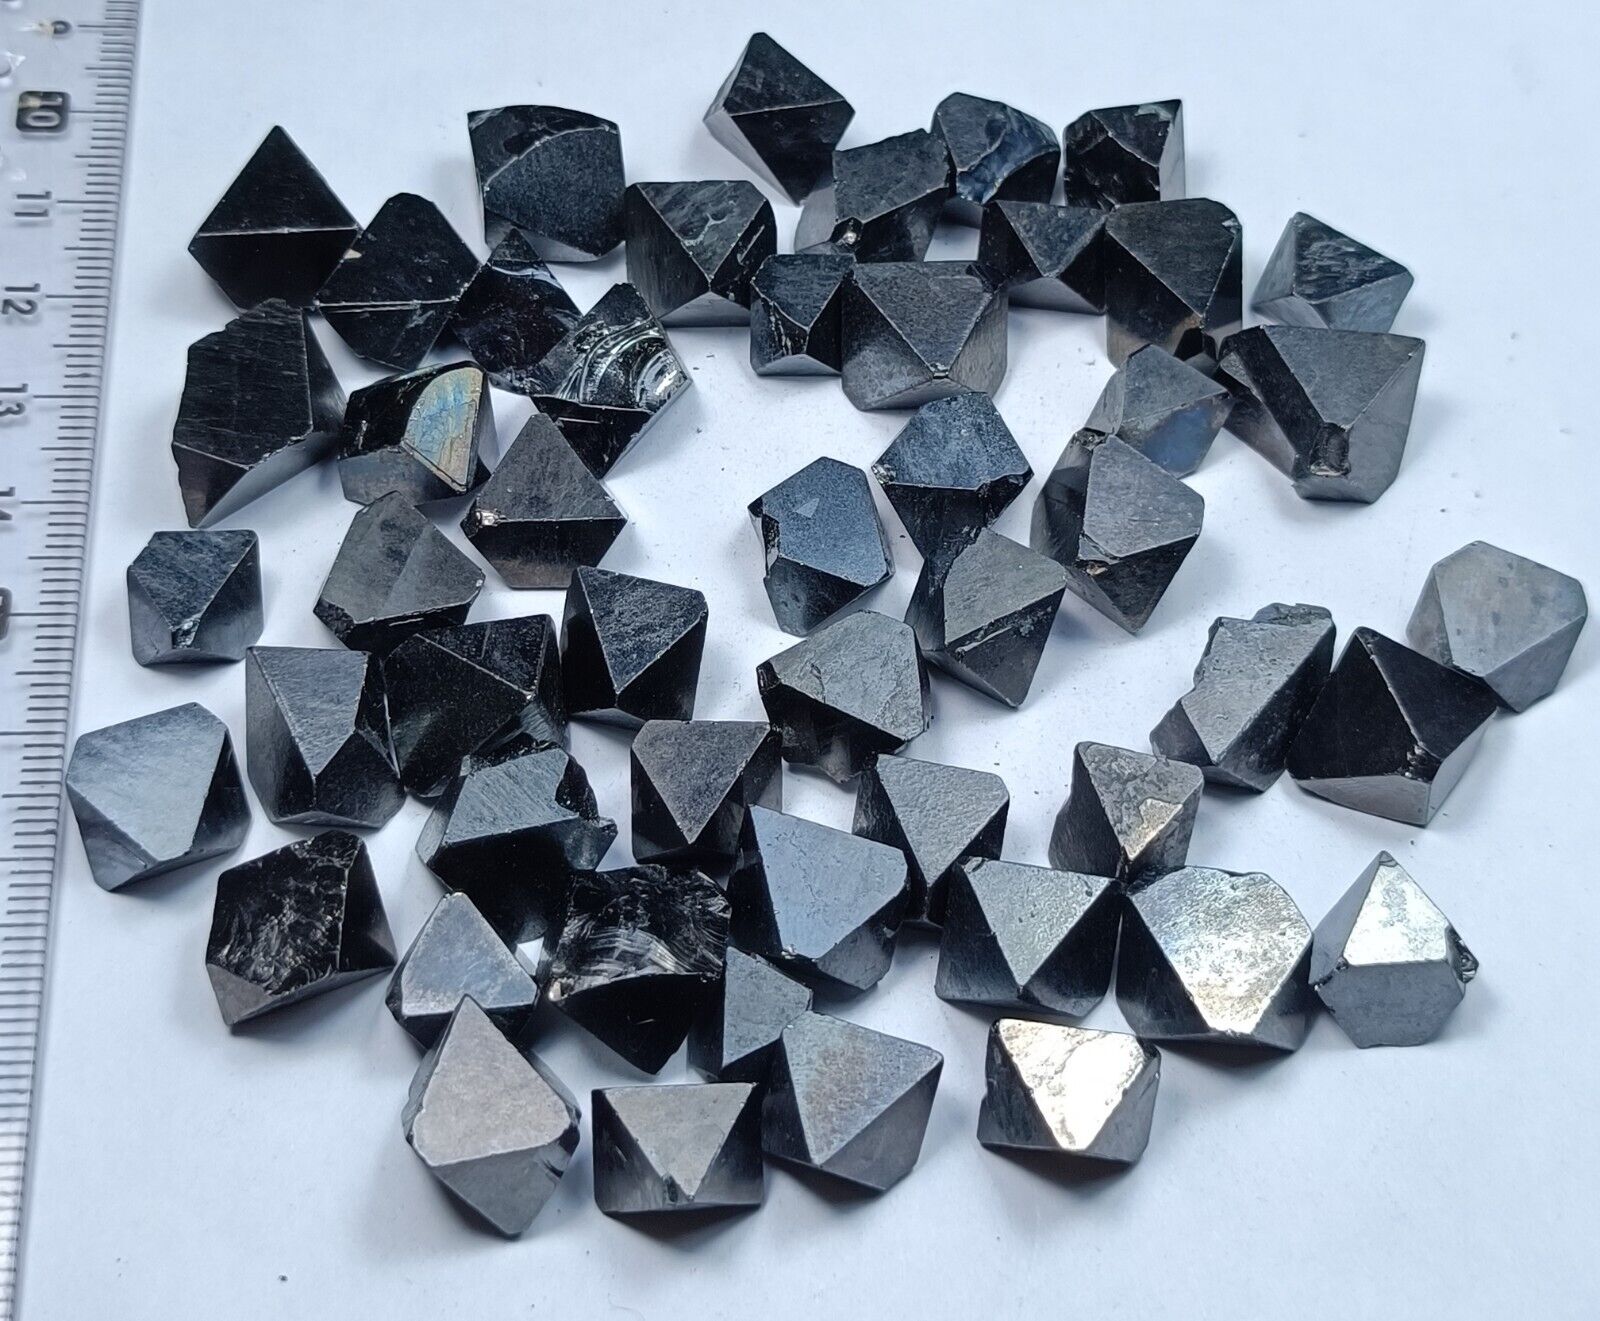 55 PCs Octahedron Magnetite Crystals with good luster and terminations-